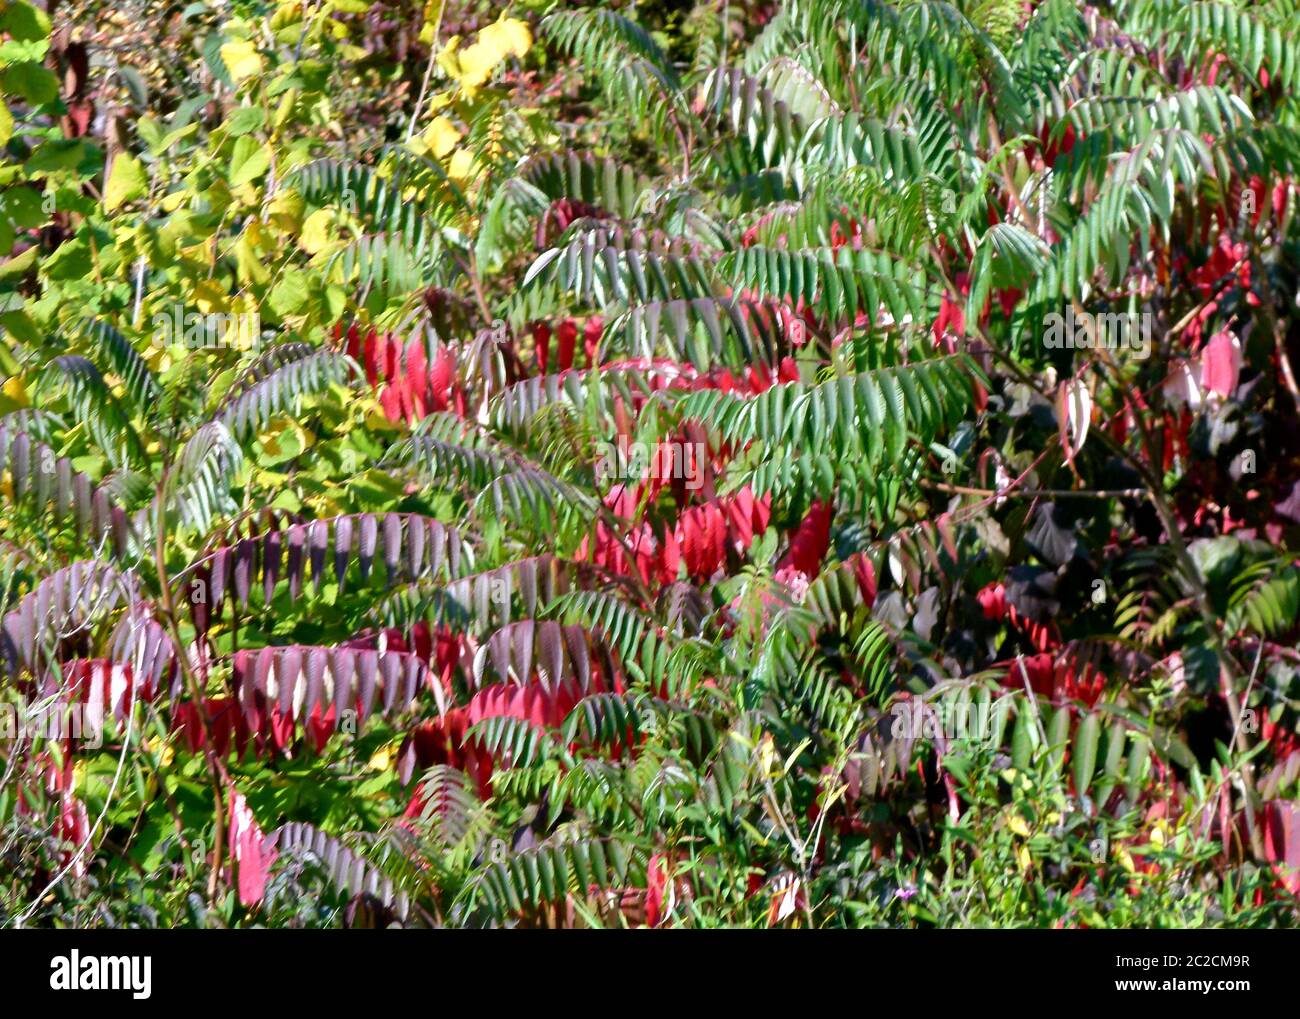 Garden corner with green and red leaves Stock Photo